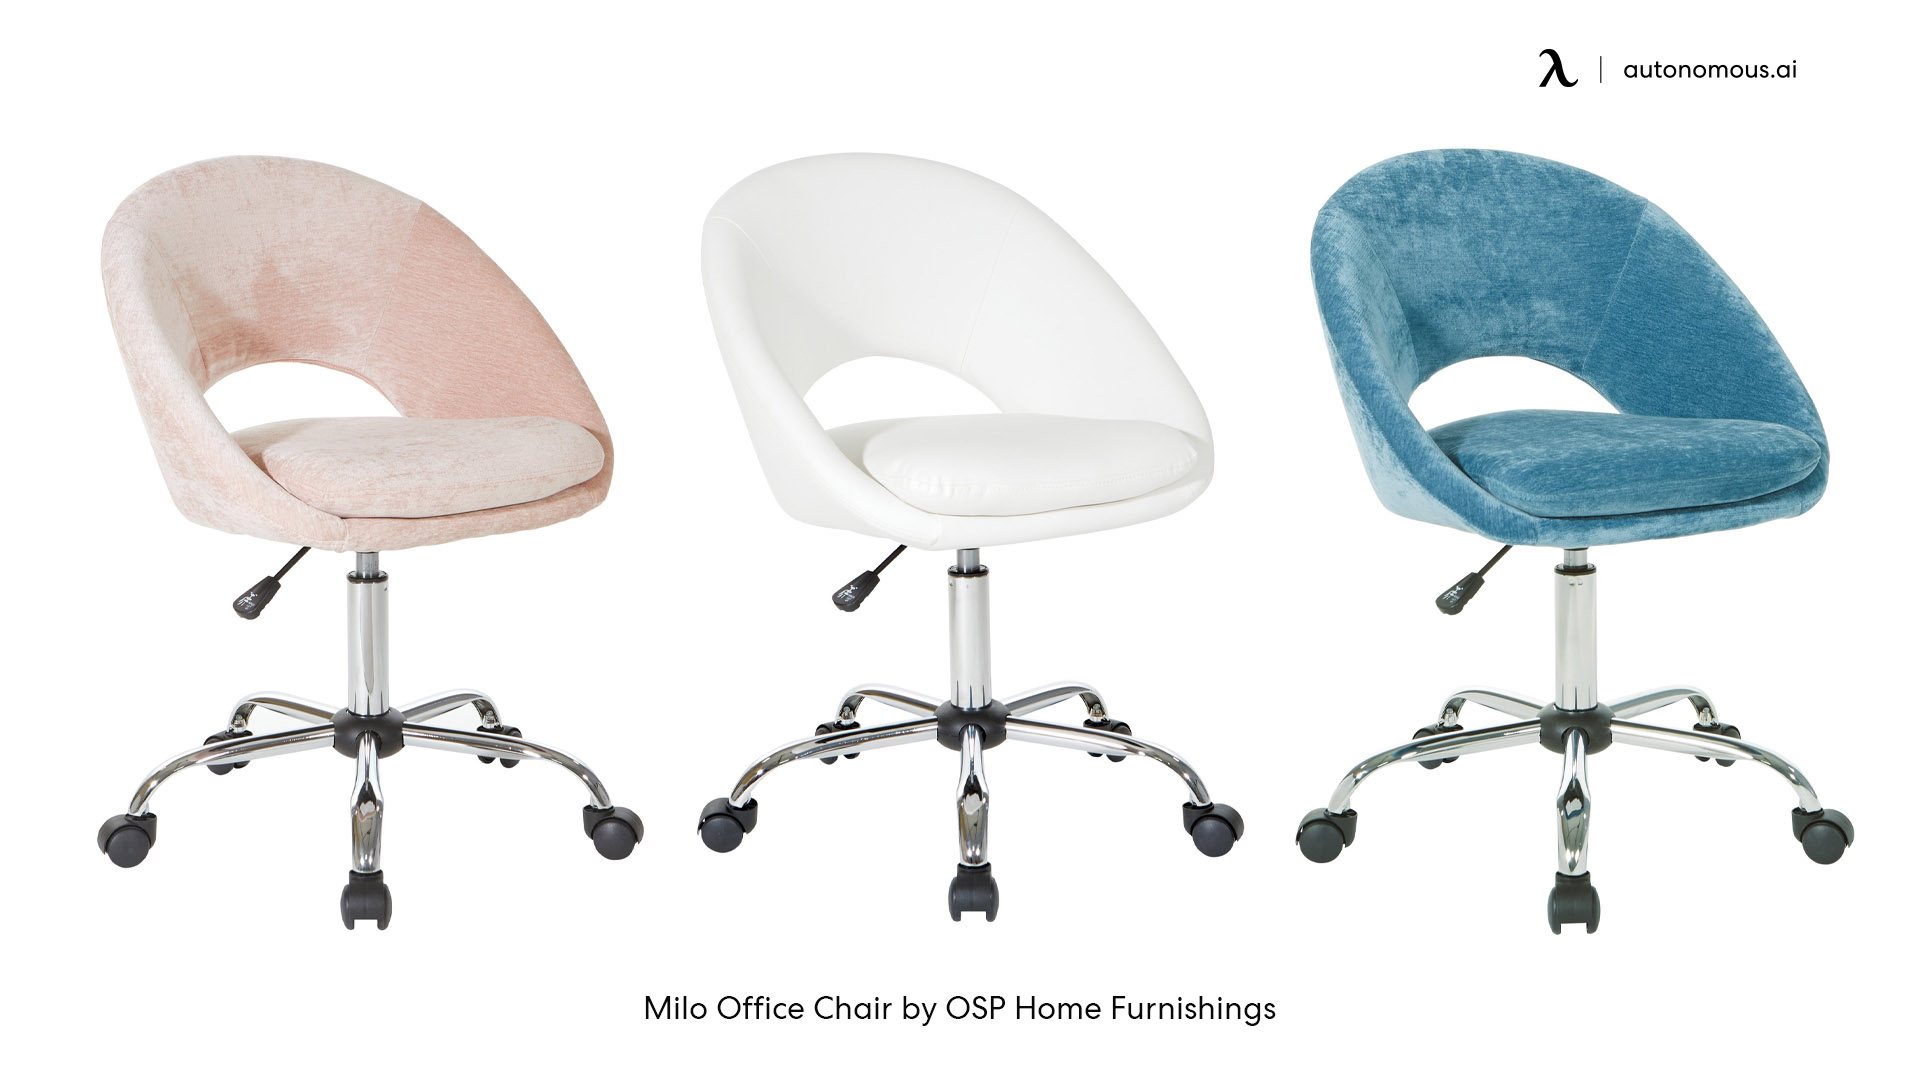 Milo Office Chair by OSP Home Furnishings